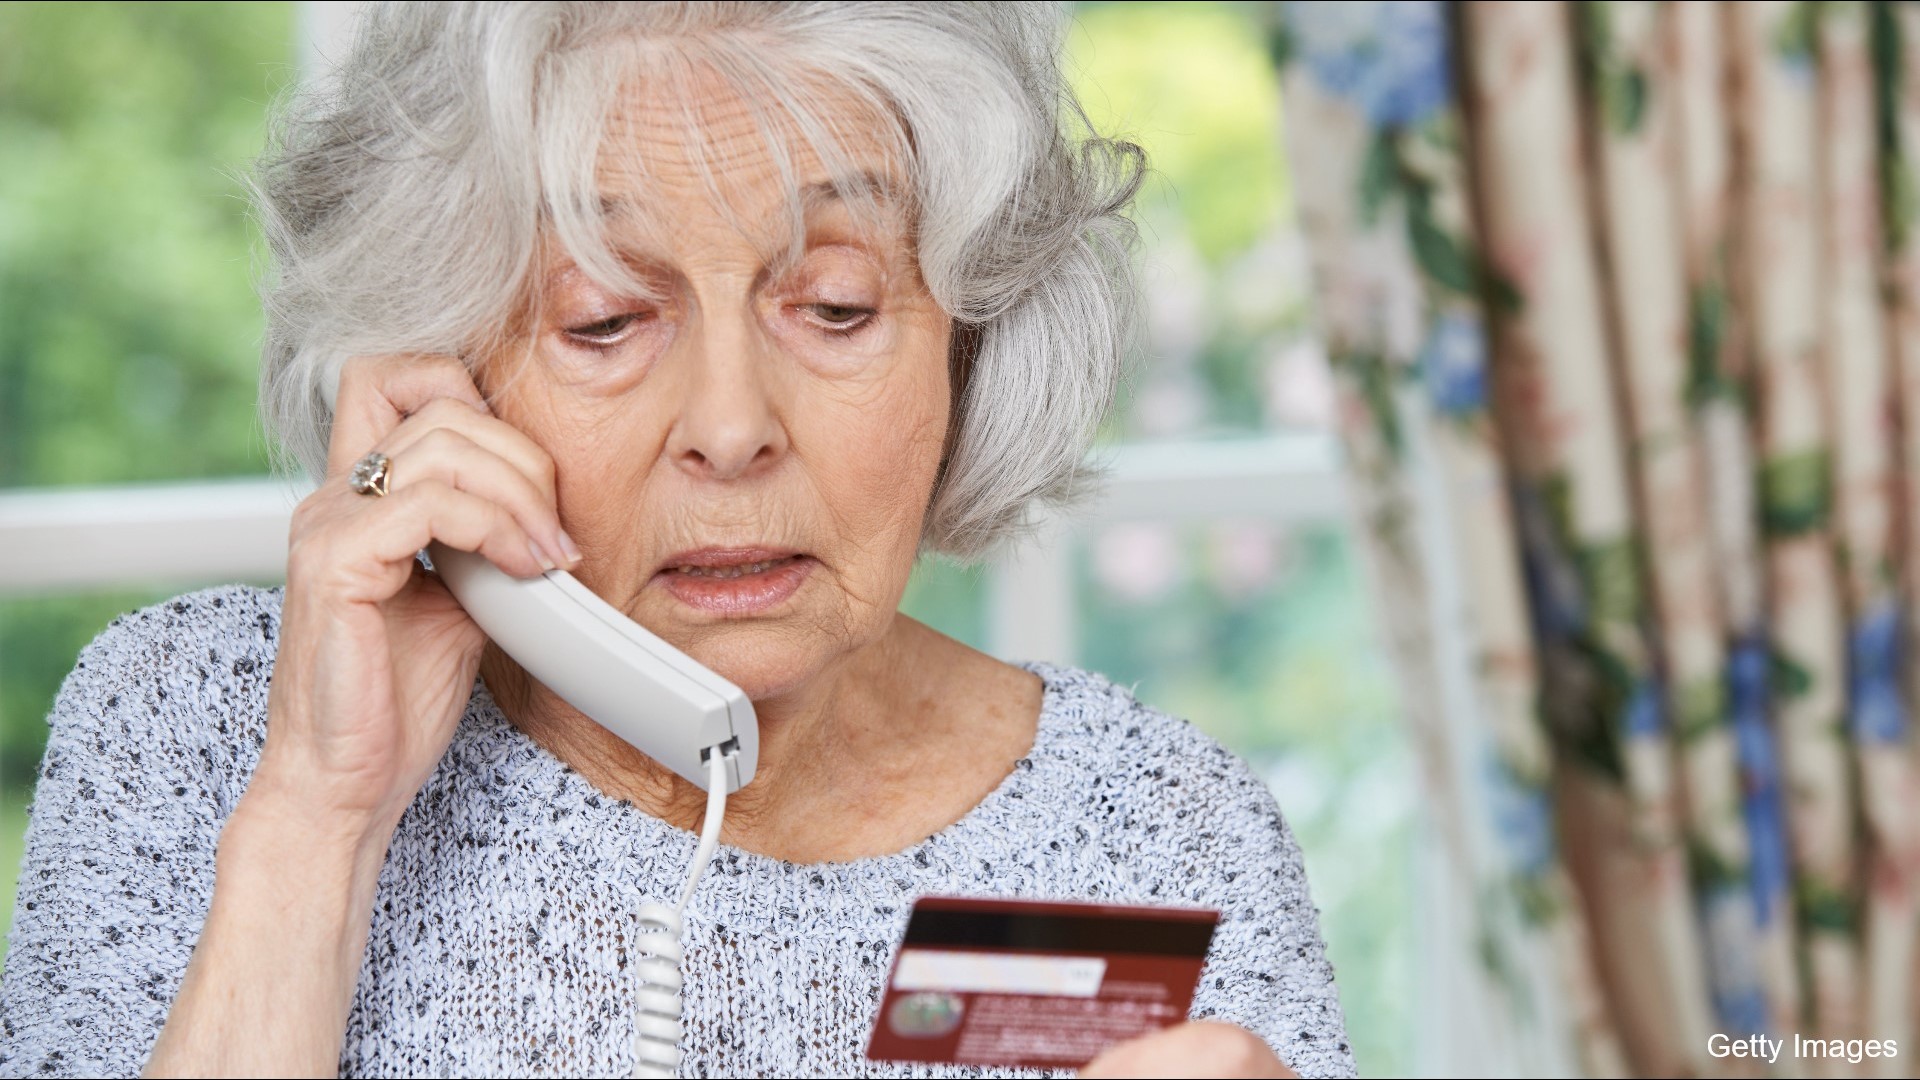 Fraudsters are faking phone numbers on caller IDs, making calls appear to be from official sources like the sheriff's office or the IRS. Sponsored by AARP.